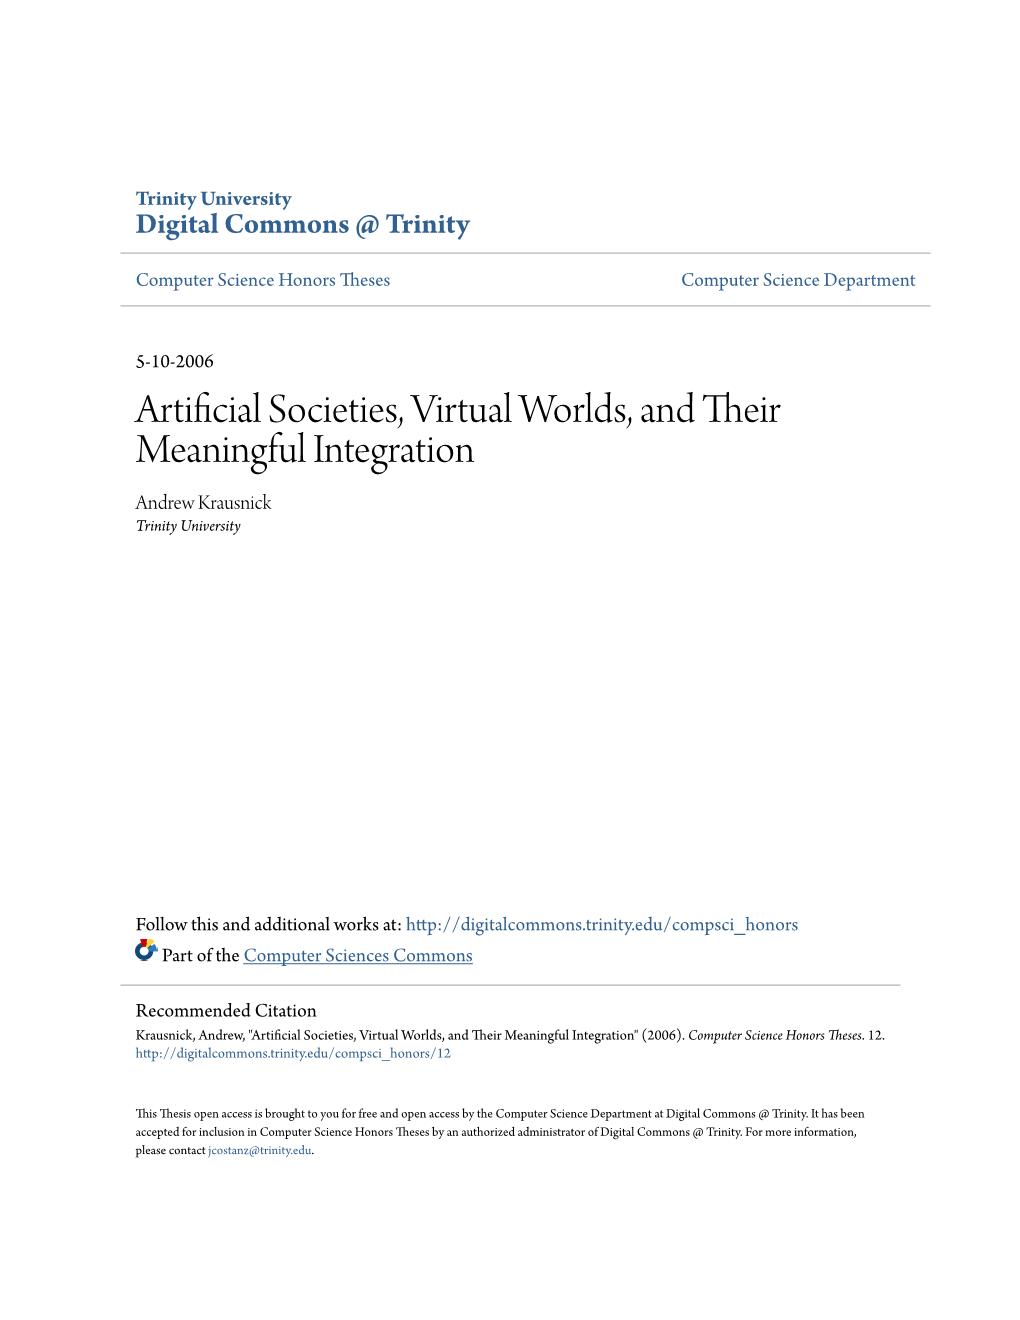 Artificial Societies, Virtual Worlds, and Their Meaningful Integration Andrew Krausnick Trinity University